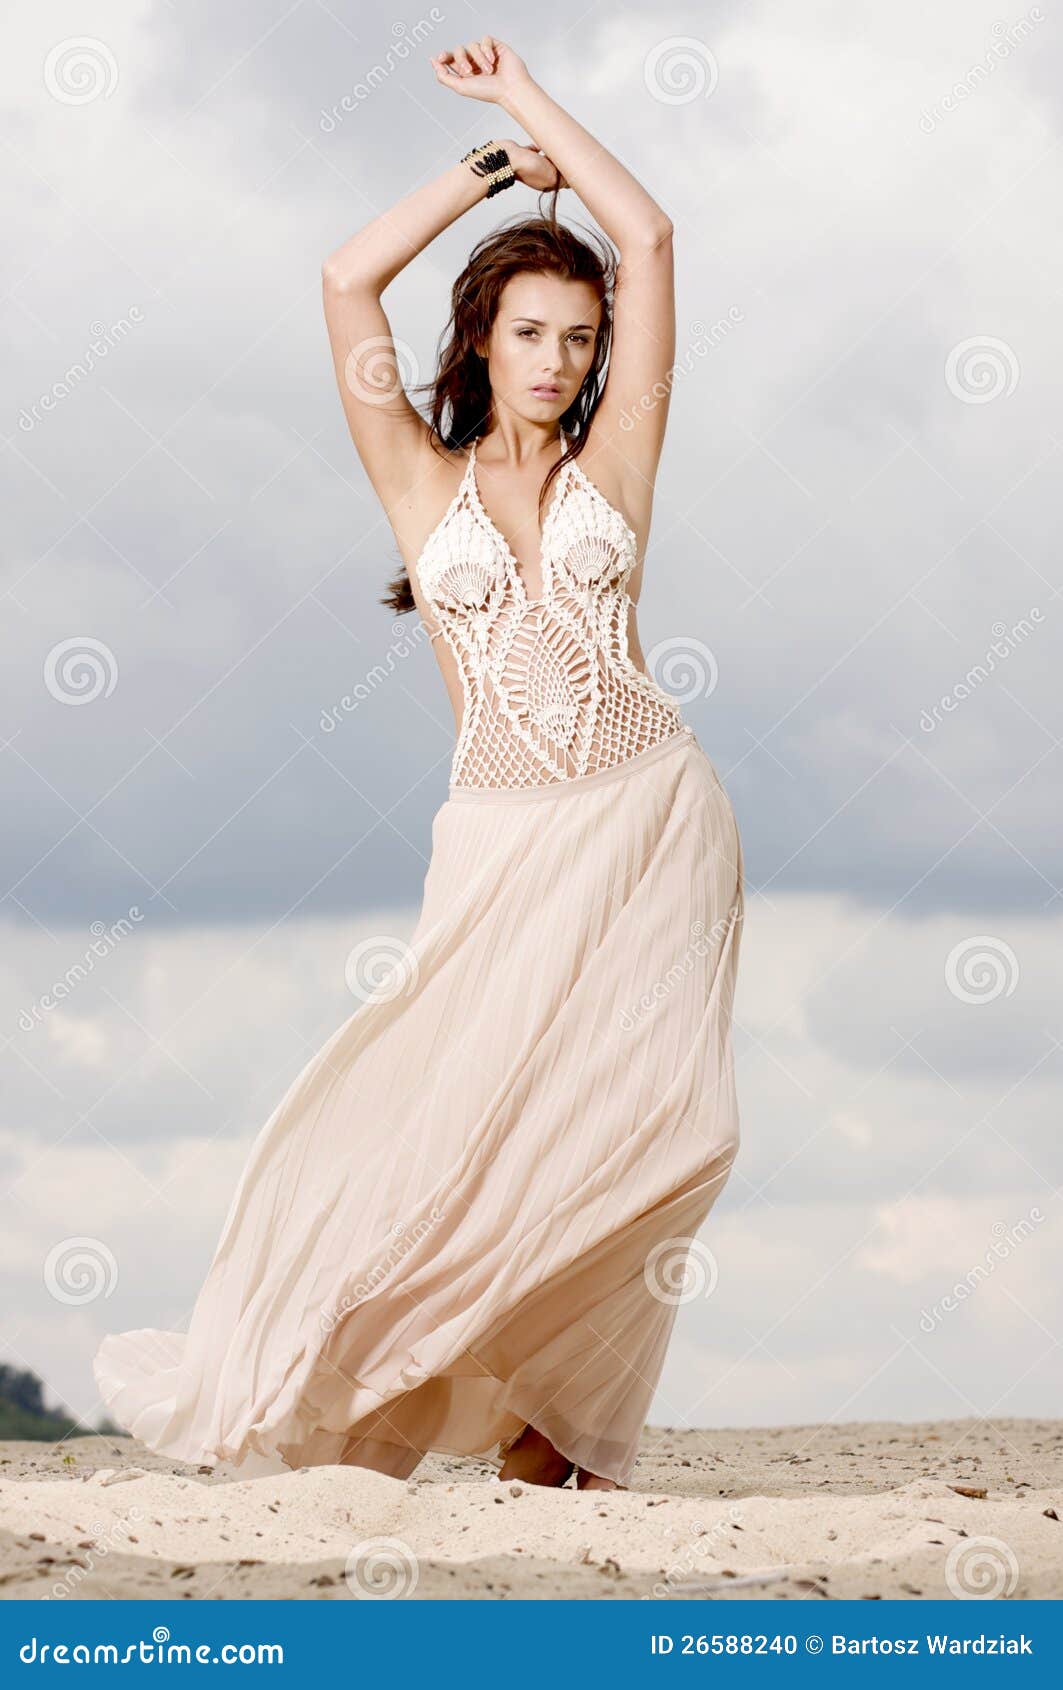 attractive and sensuality woman in the desert